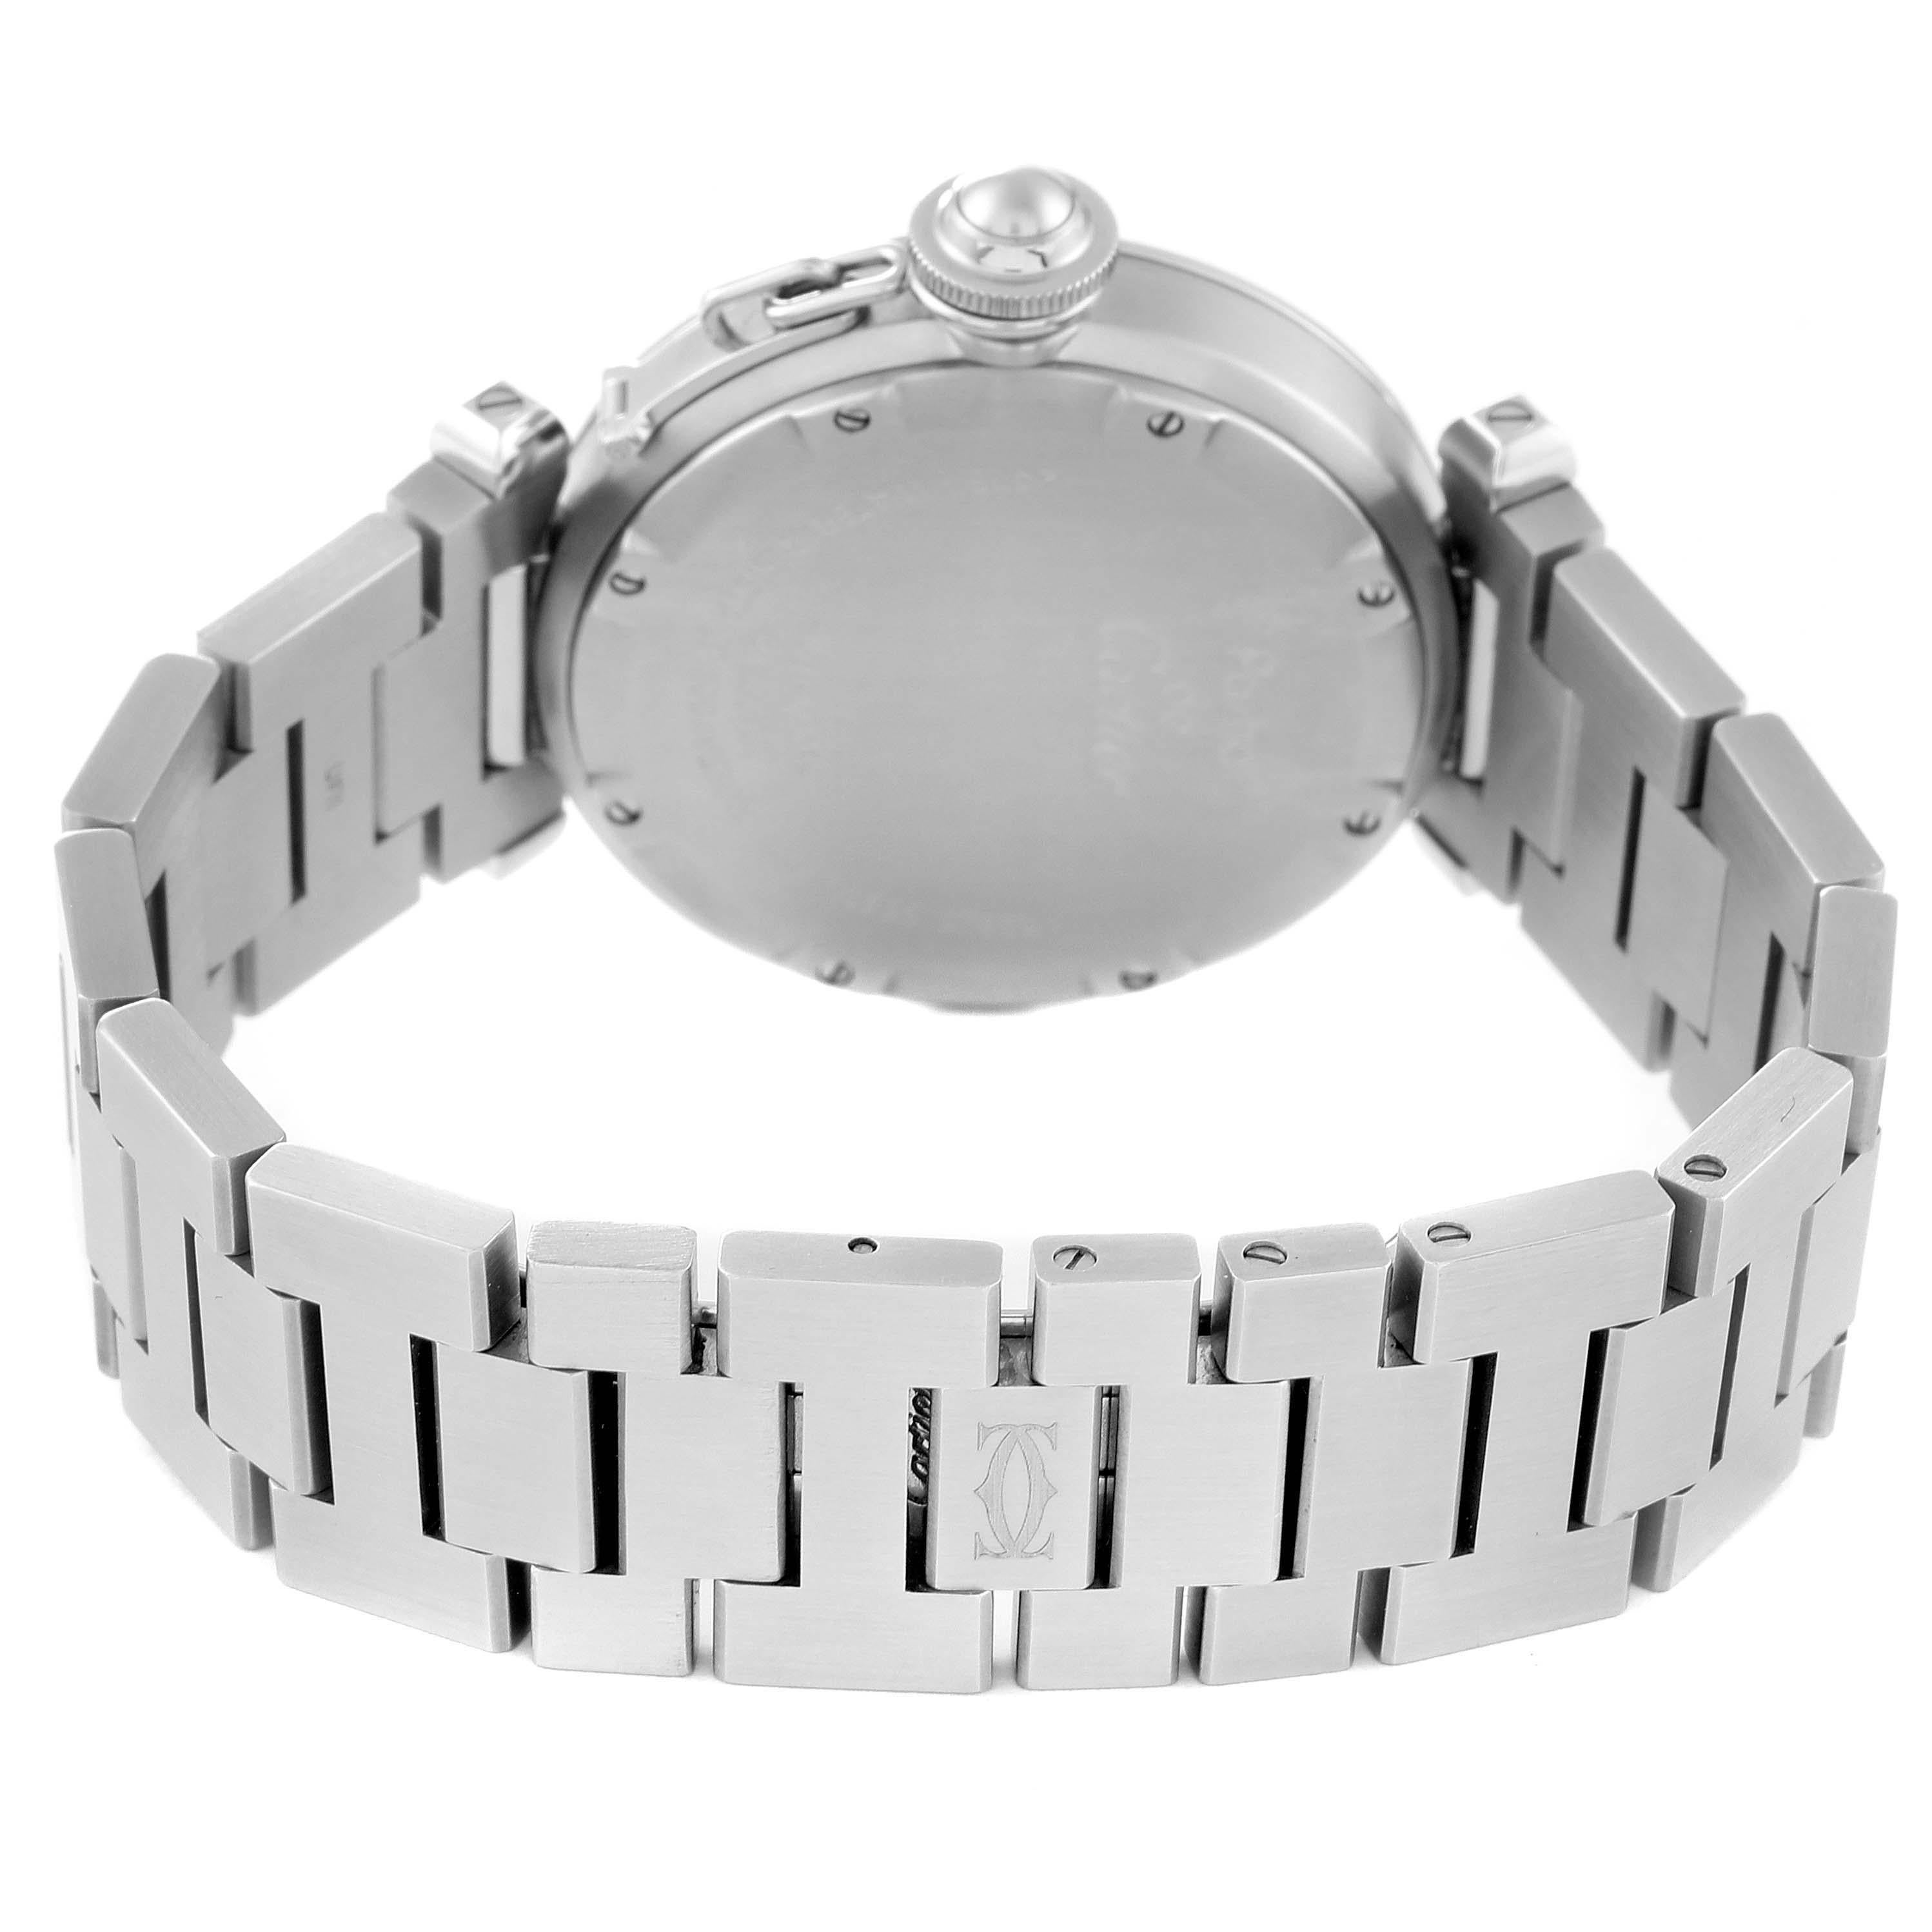 Cartier Pasha C Big Date Midsize Steel White Dial Mens Watch W31055M7 For Sale 3